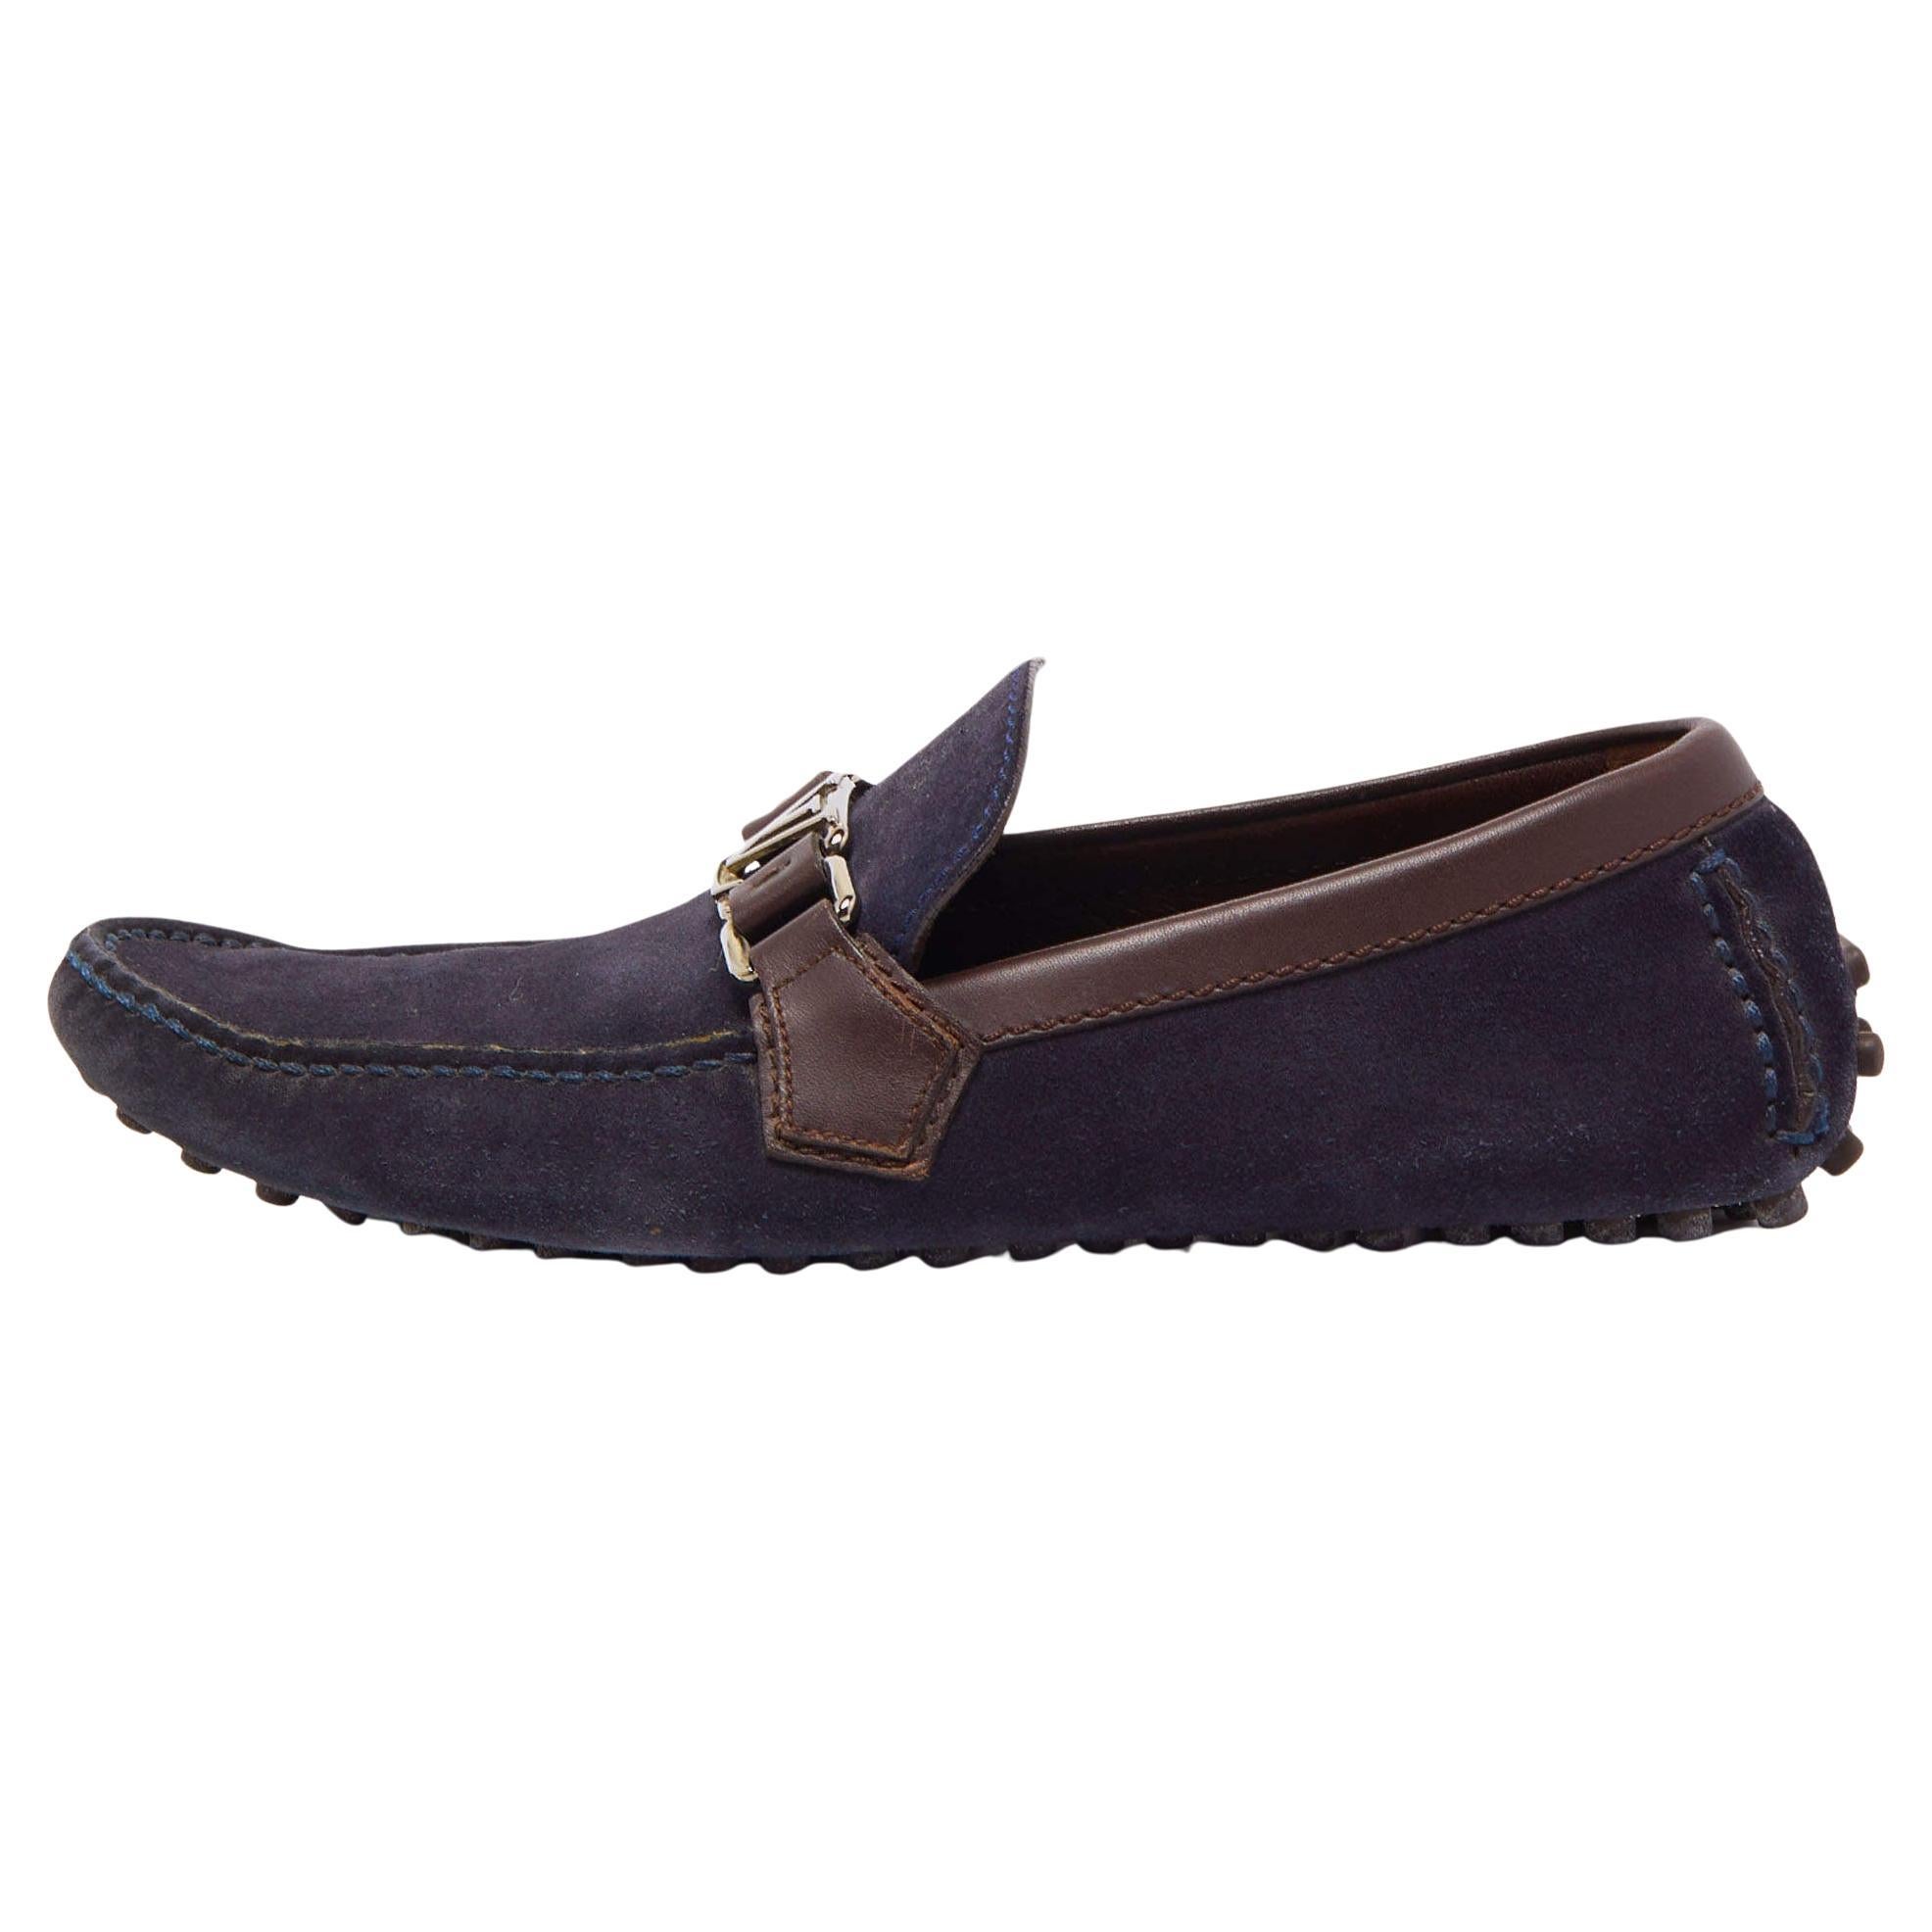 Louis Vuitton Navy Blue/Brown Suede and Leather Hockenheim Slip On Loafers Size  For Sale